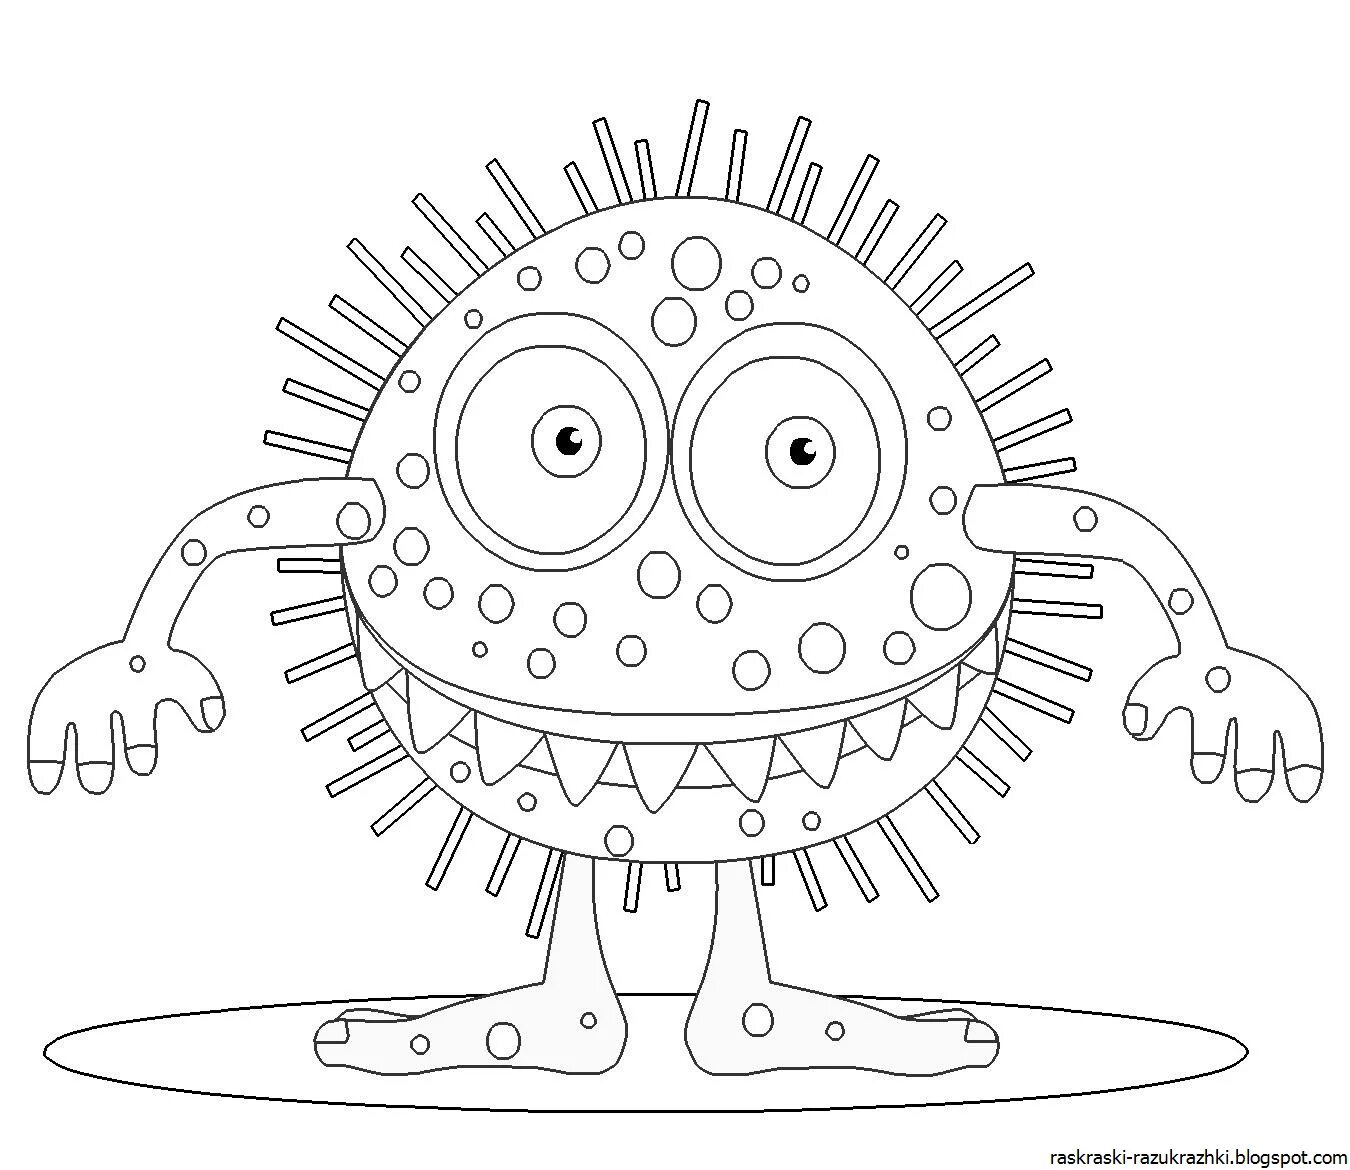 Coloring book insightful microbes and bacteria